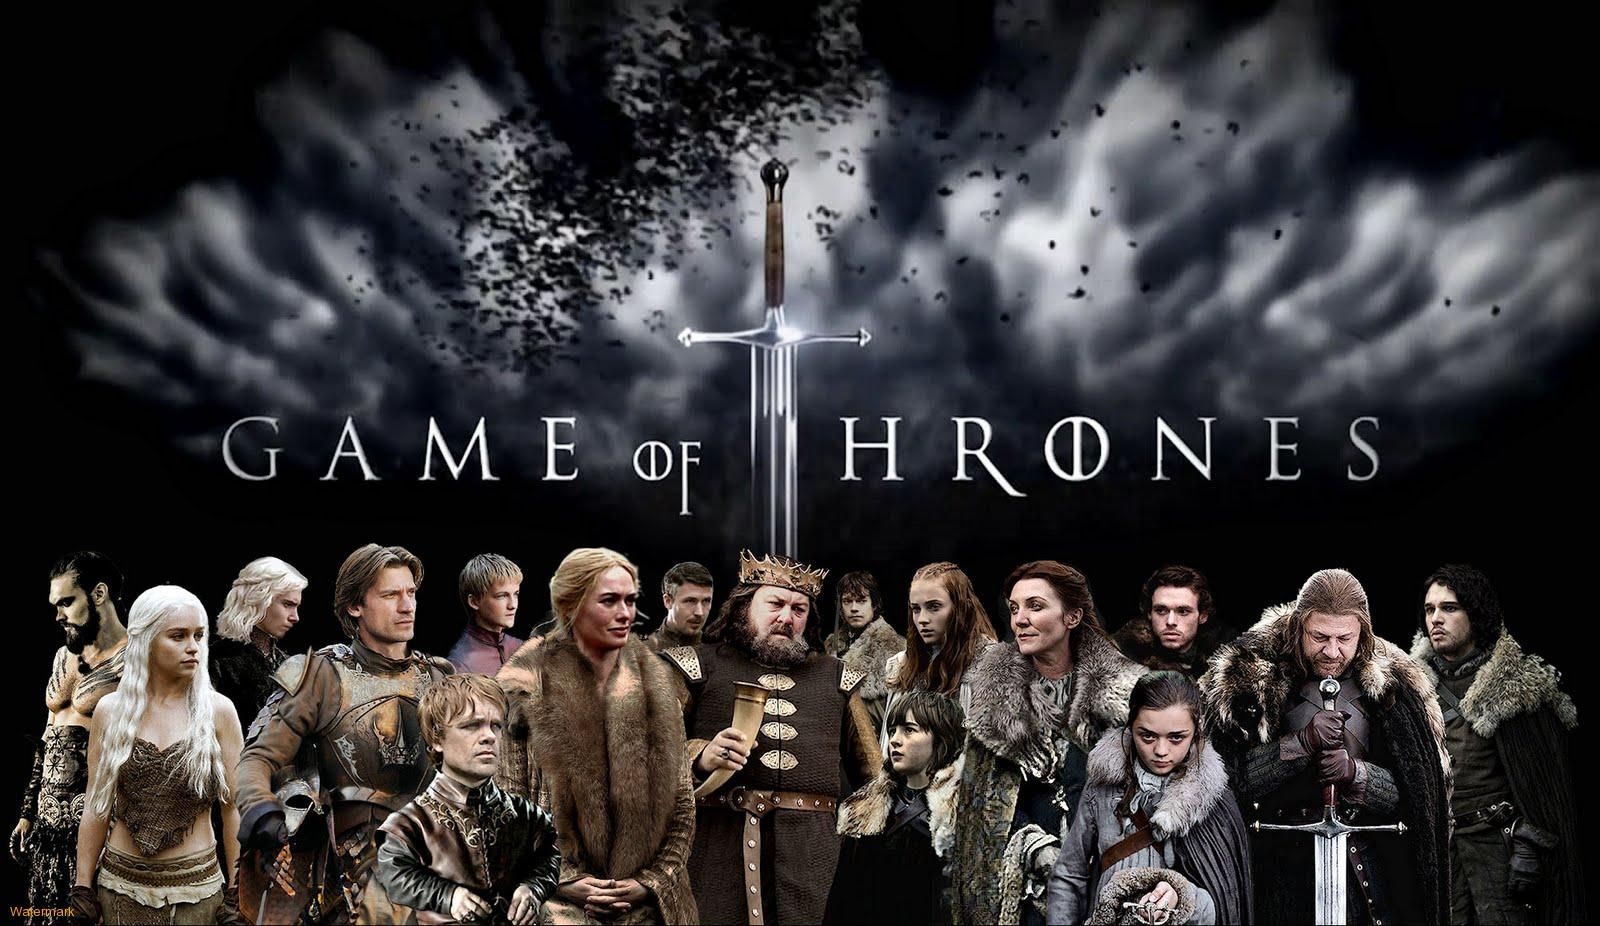 Game Of Thrones. Game of thrones cast, Favorite tv shows, Watch game of thrones